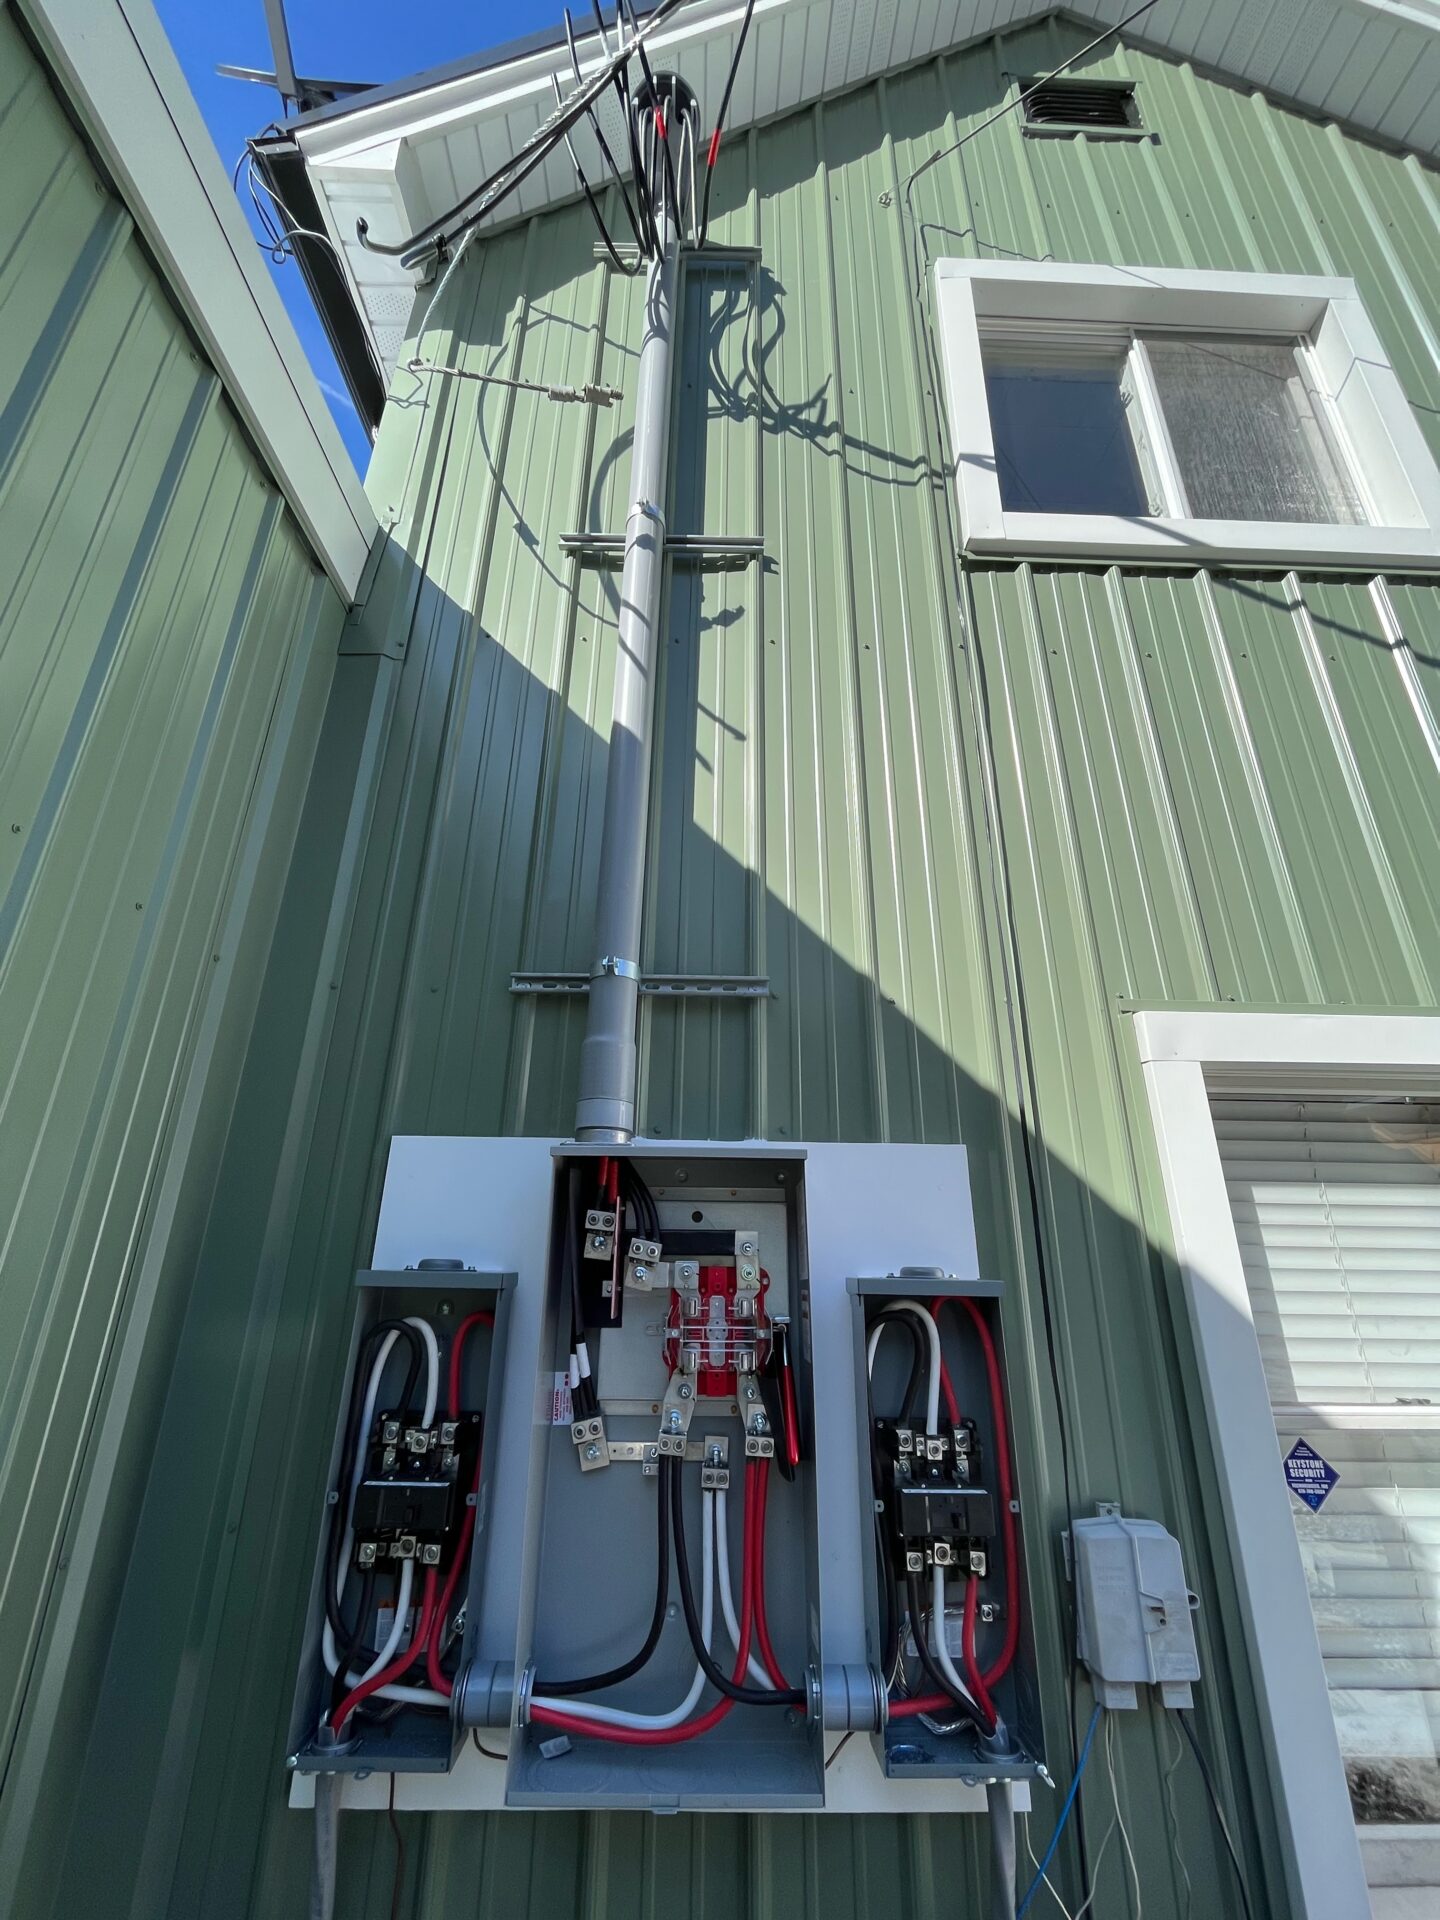 400 amp service entrance at the Mountain Top in Lock Haven Pennsylvania.